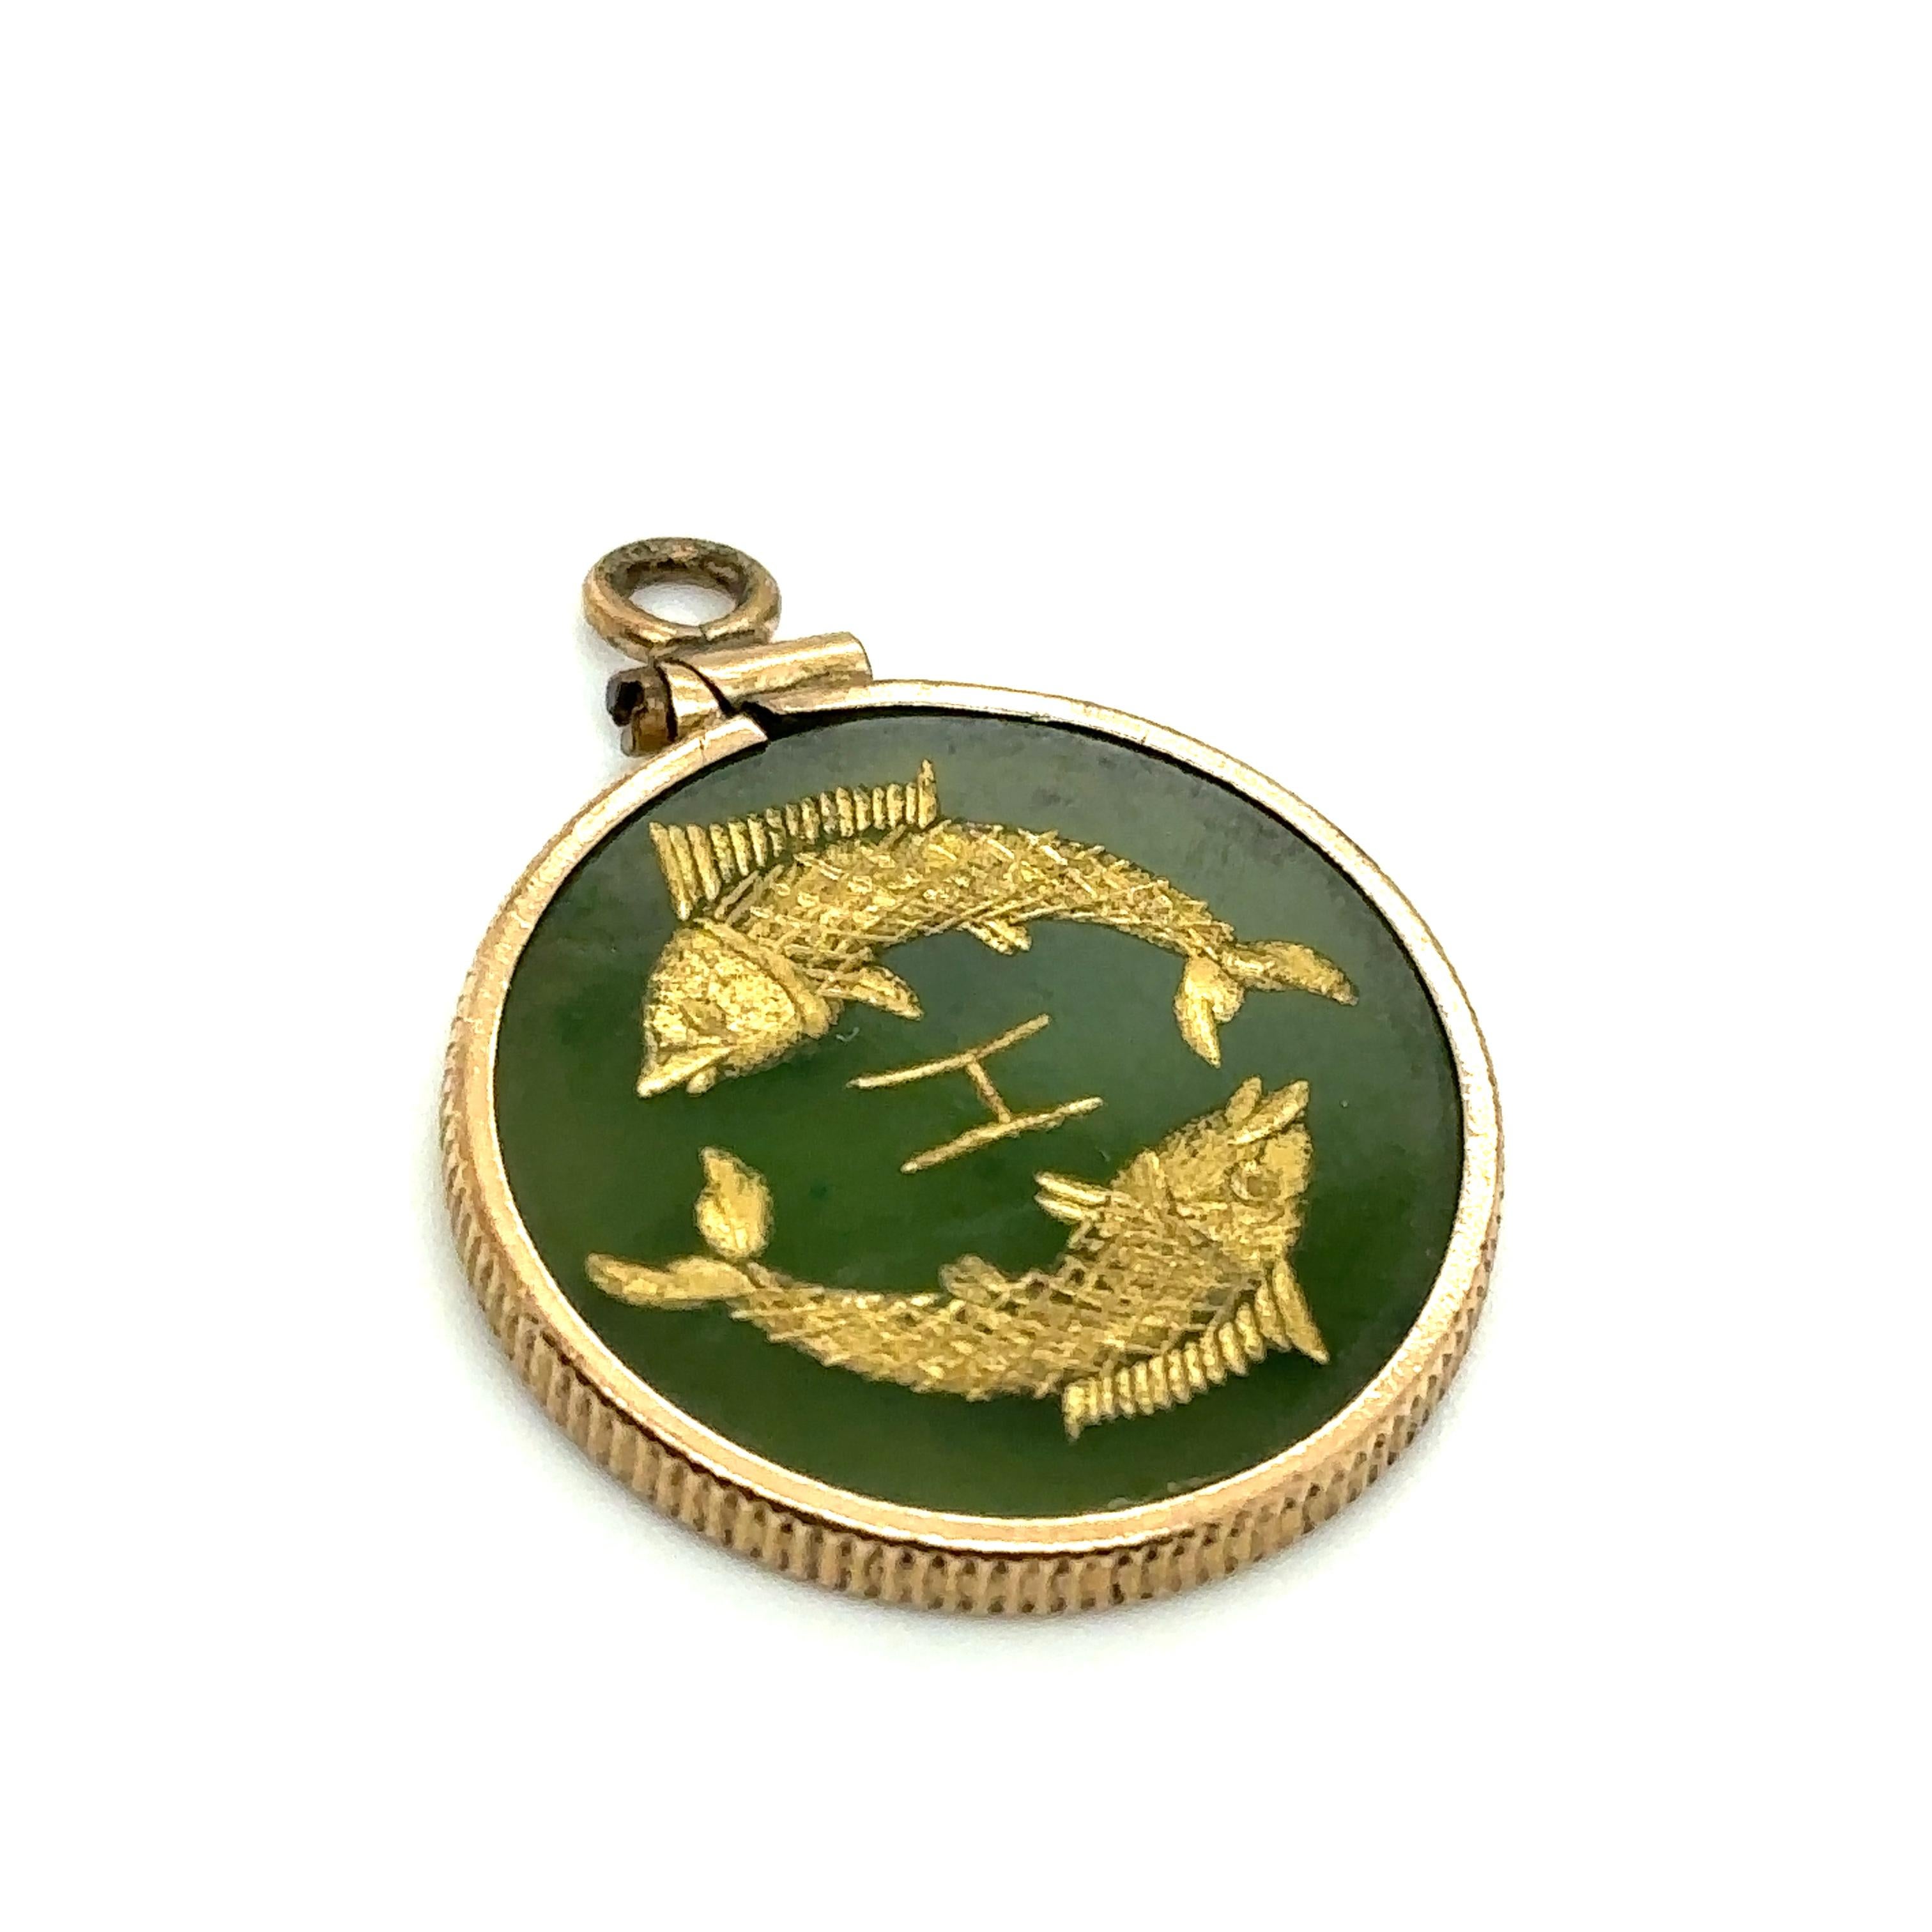 Item Details: This 1960s Pisces fish zodiac pendant is made of 10k gold with a green glass disc and an intaglio style design. 

Circa: 1960s
Metal Type: 10 Karat Yellow Gold
Weight: 2.7 grams
Size: 1 inch diameter